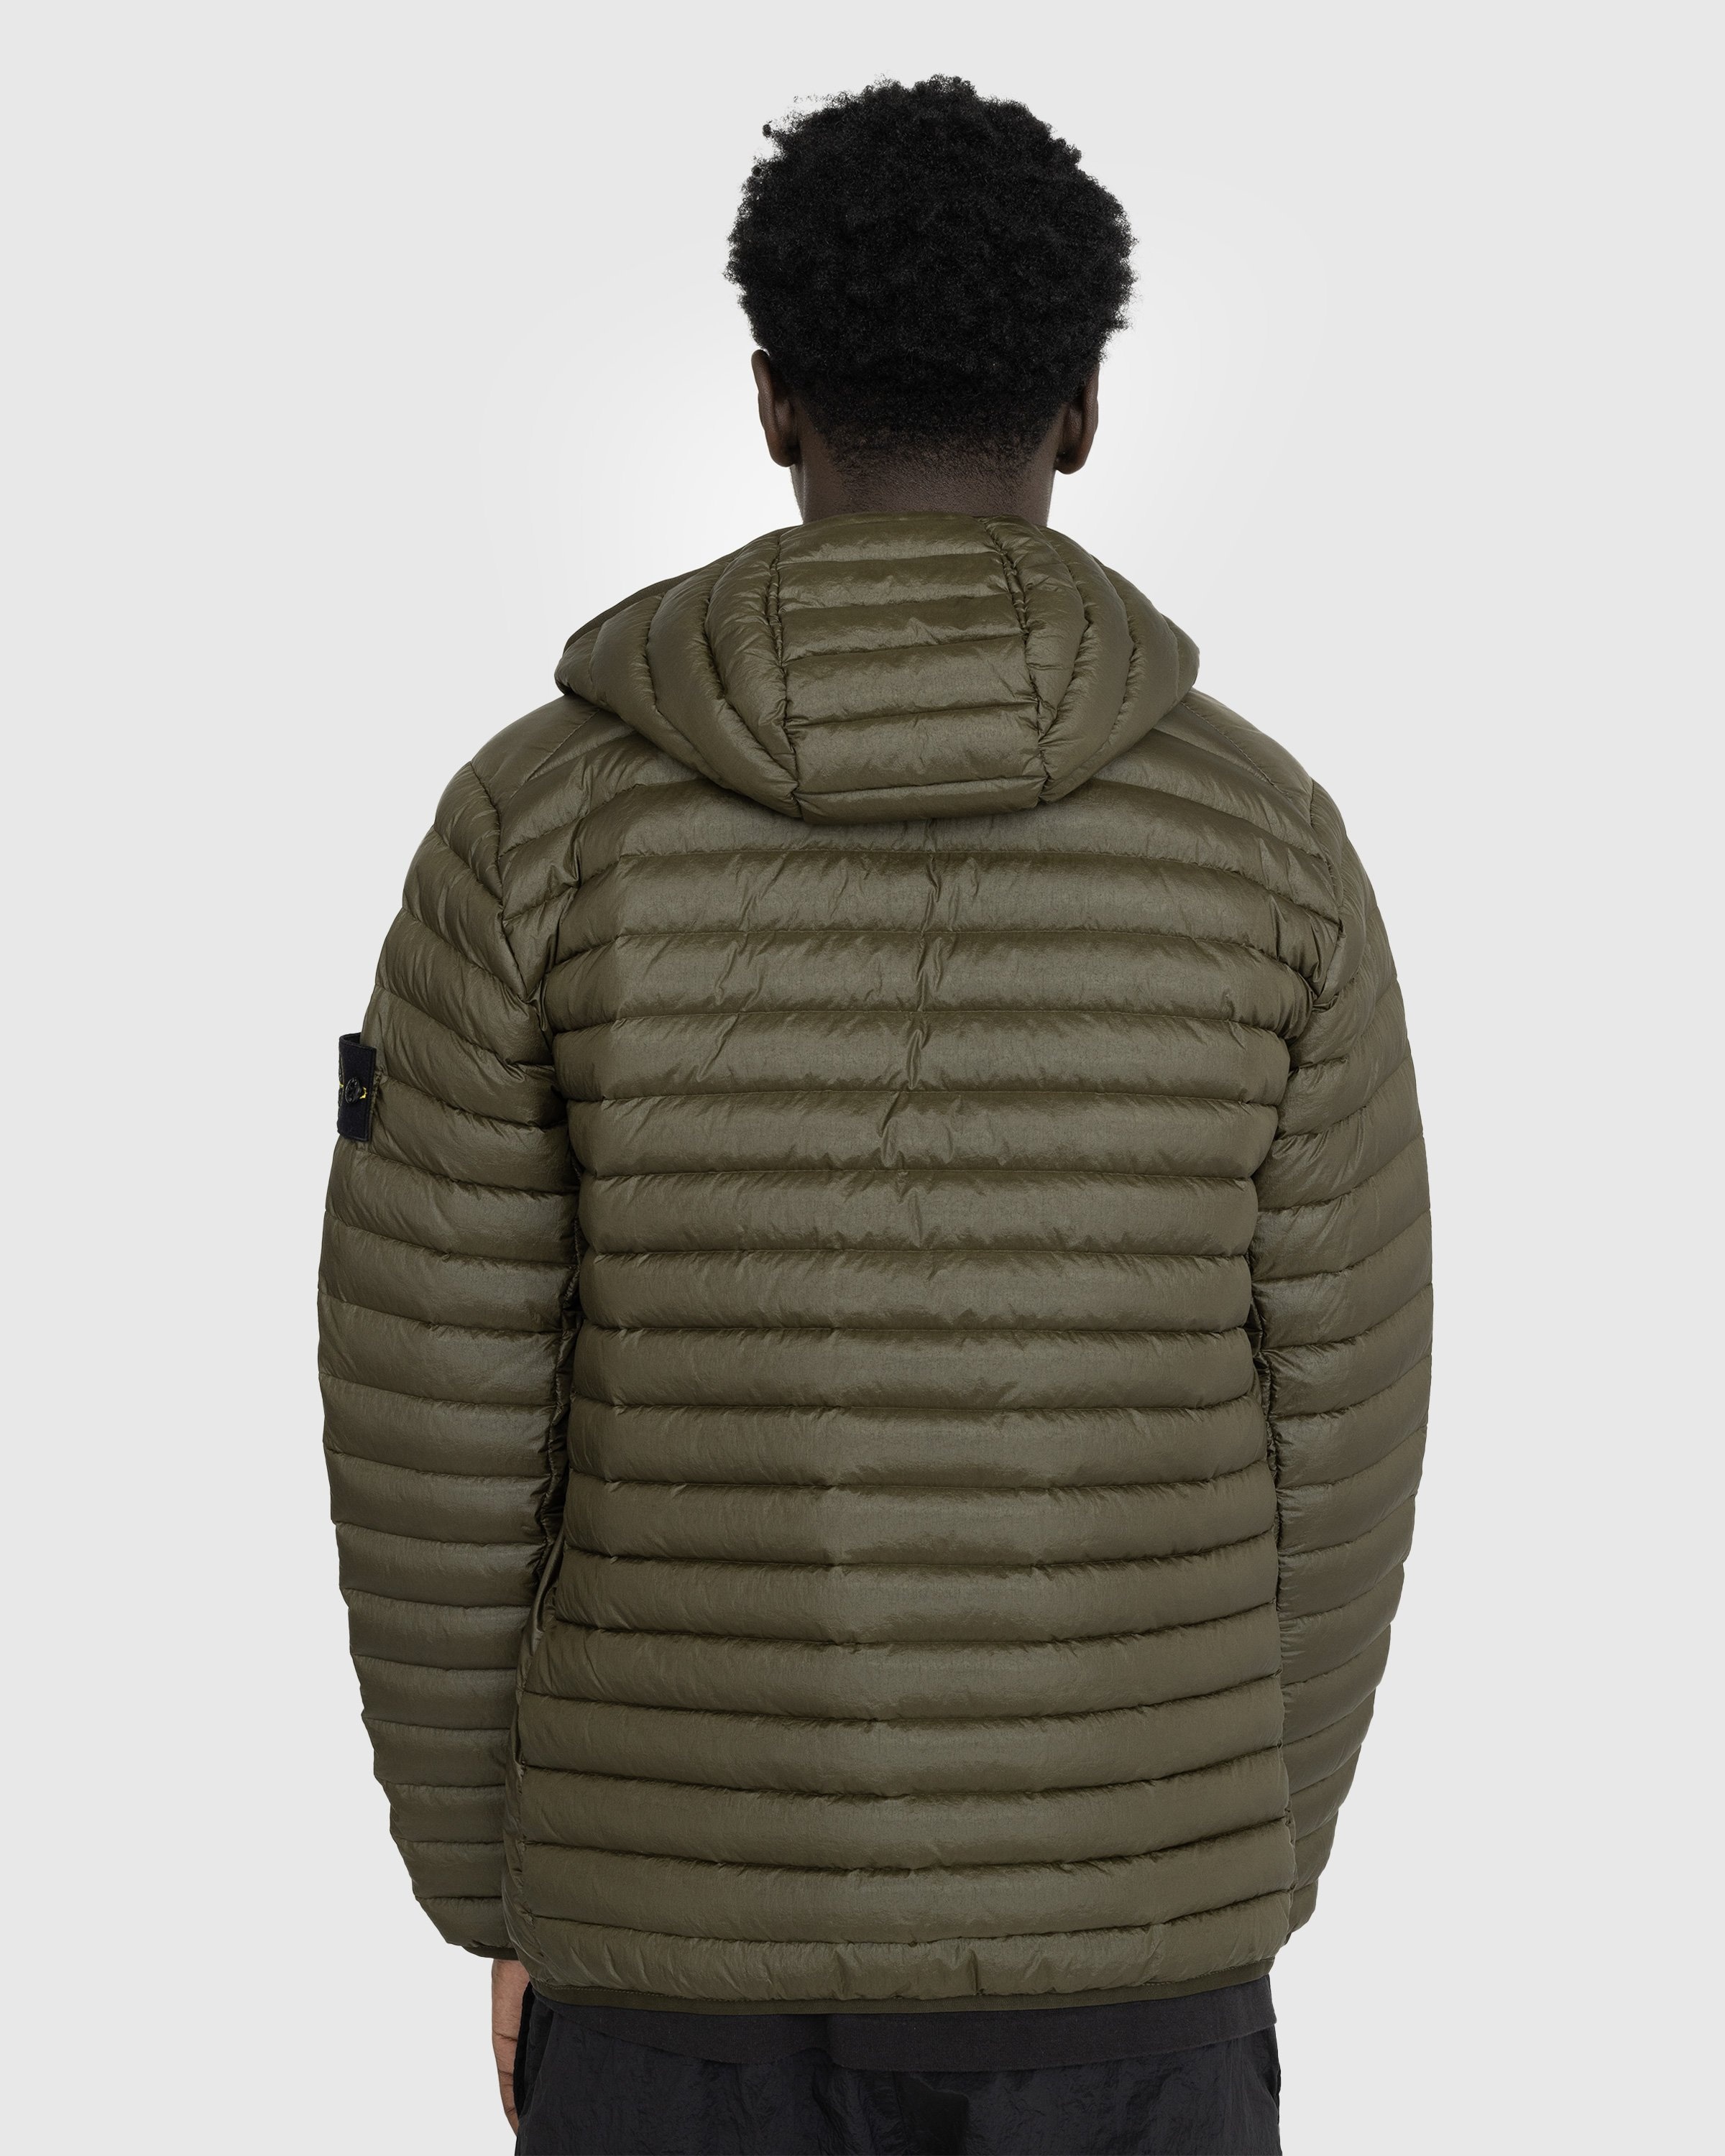 Stone Island – Packable Recycled Nylon Down Jacket Olive - Outerwear - Green - Image 3